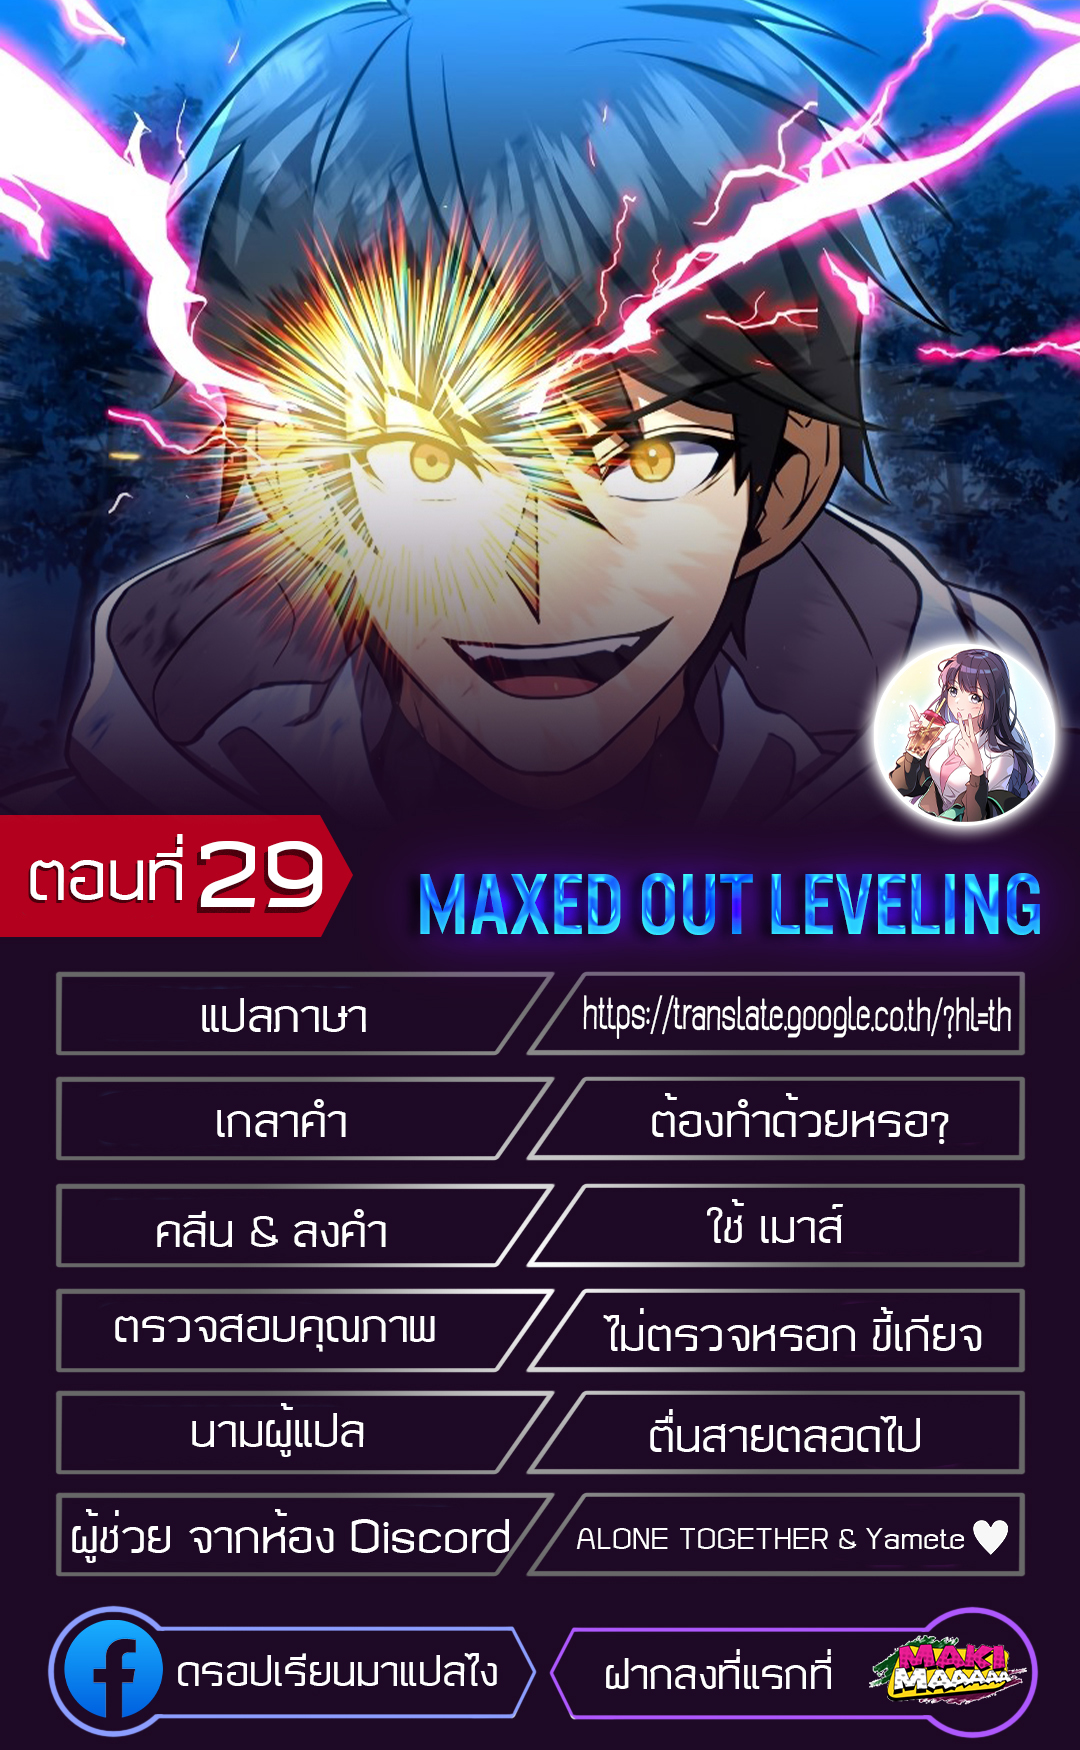 Maxed Out Leveling 29 01